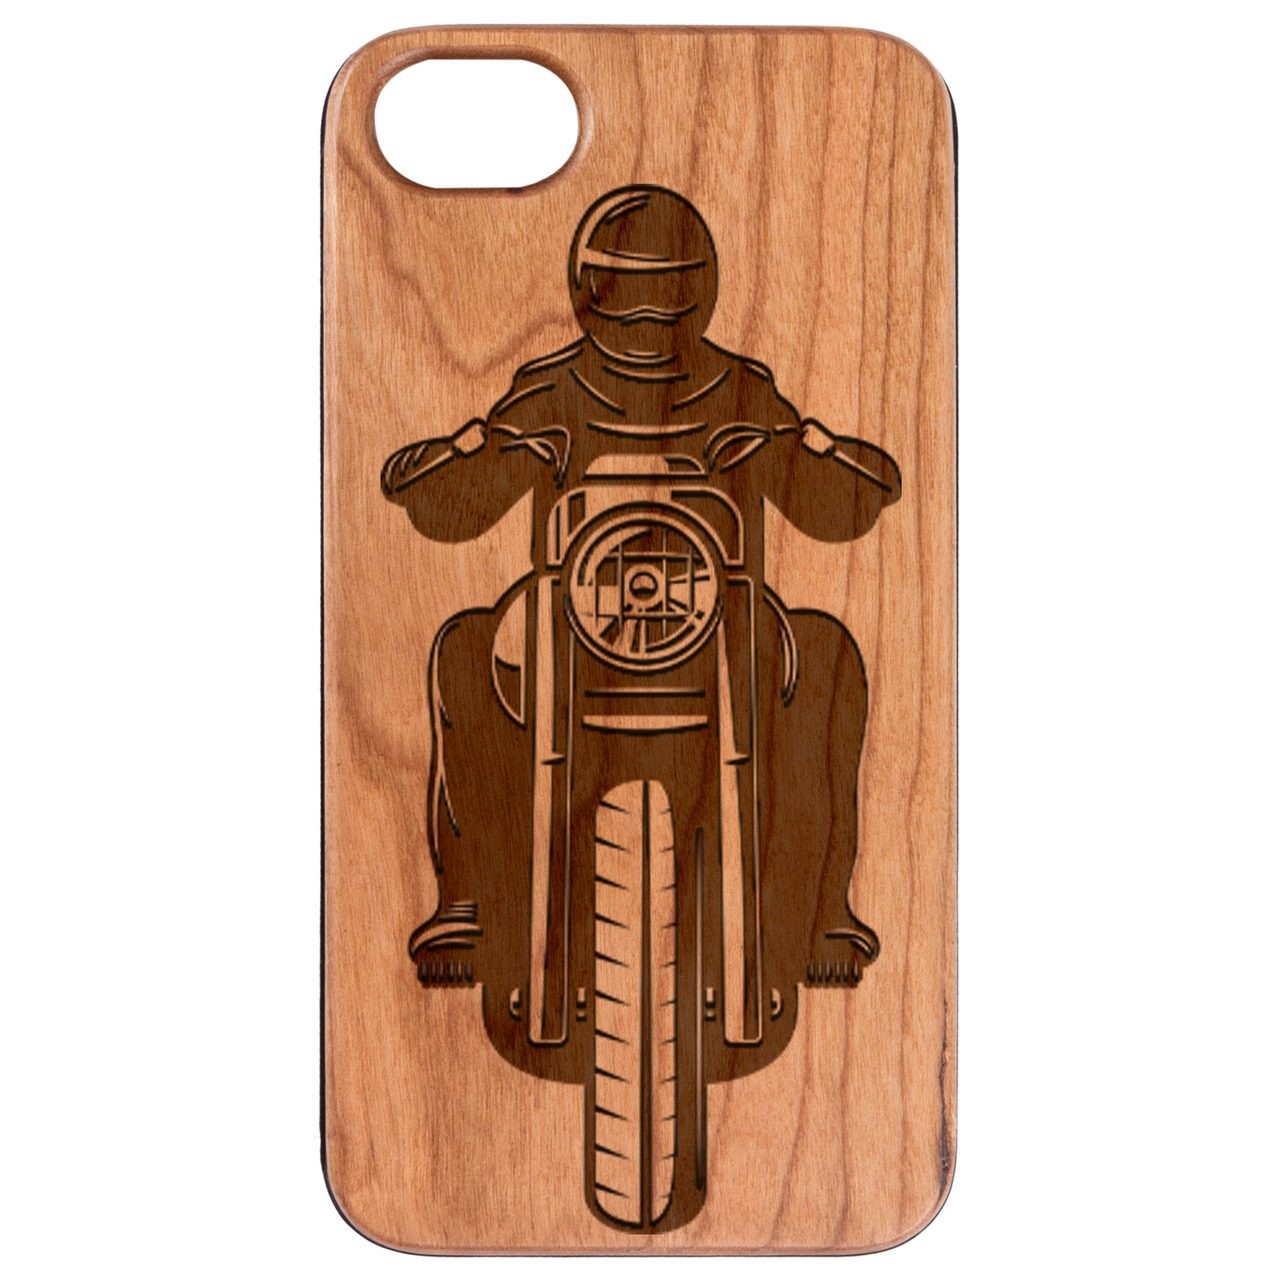  Motorcyclist - Engraved - Wooden Phone Case - IPhone 13 Models